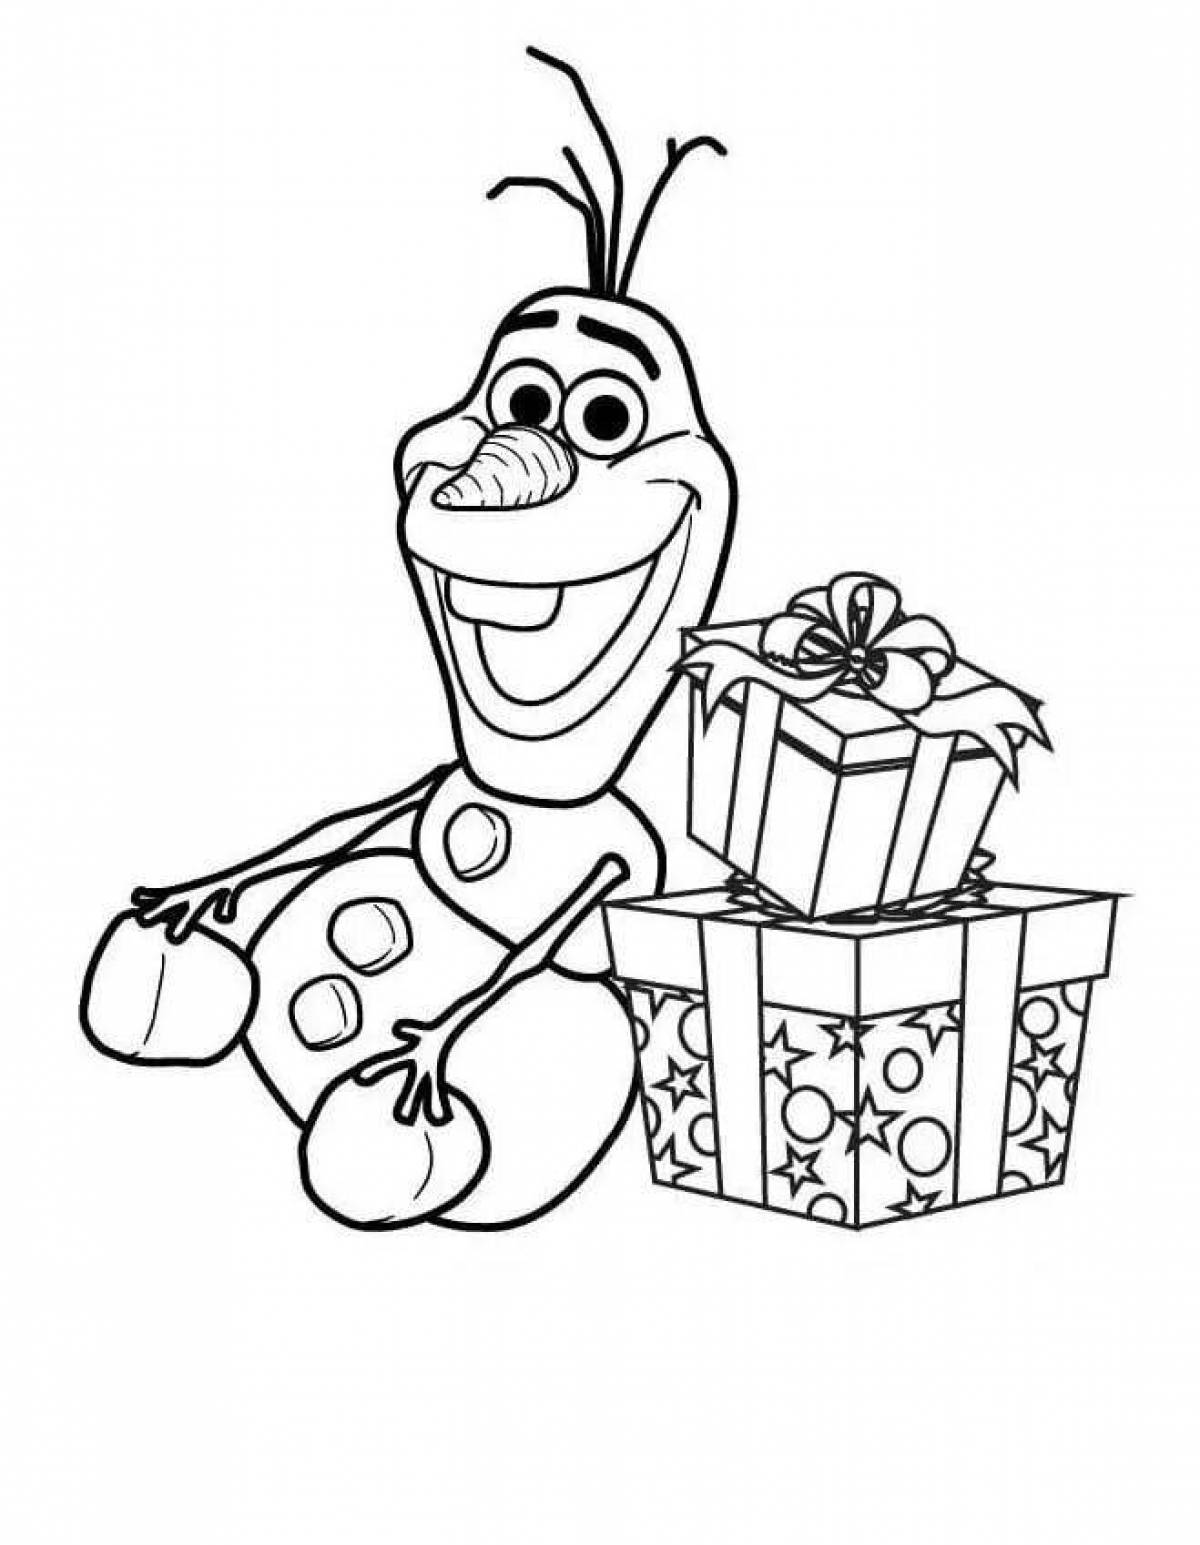 Coloring page charming snowman olaf